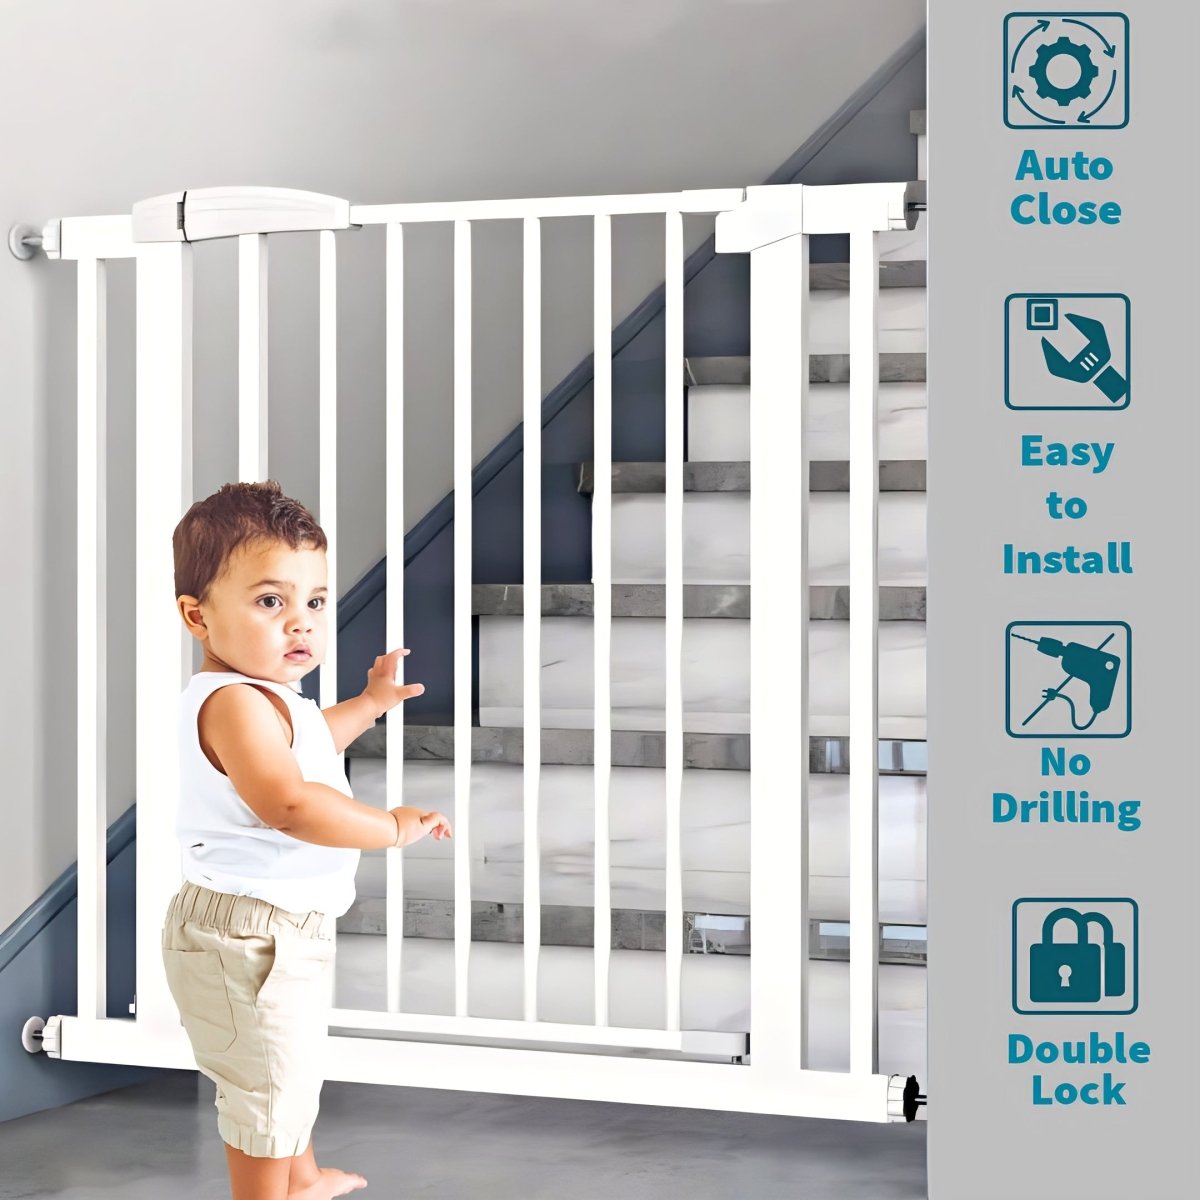 KidDough Baby Safety Gate: Auto Close with Double Lock System (75-82cms) -